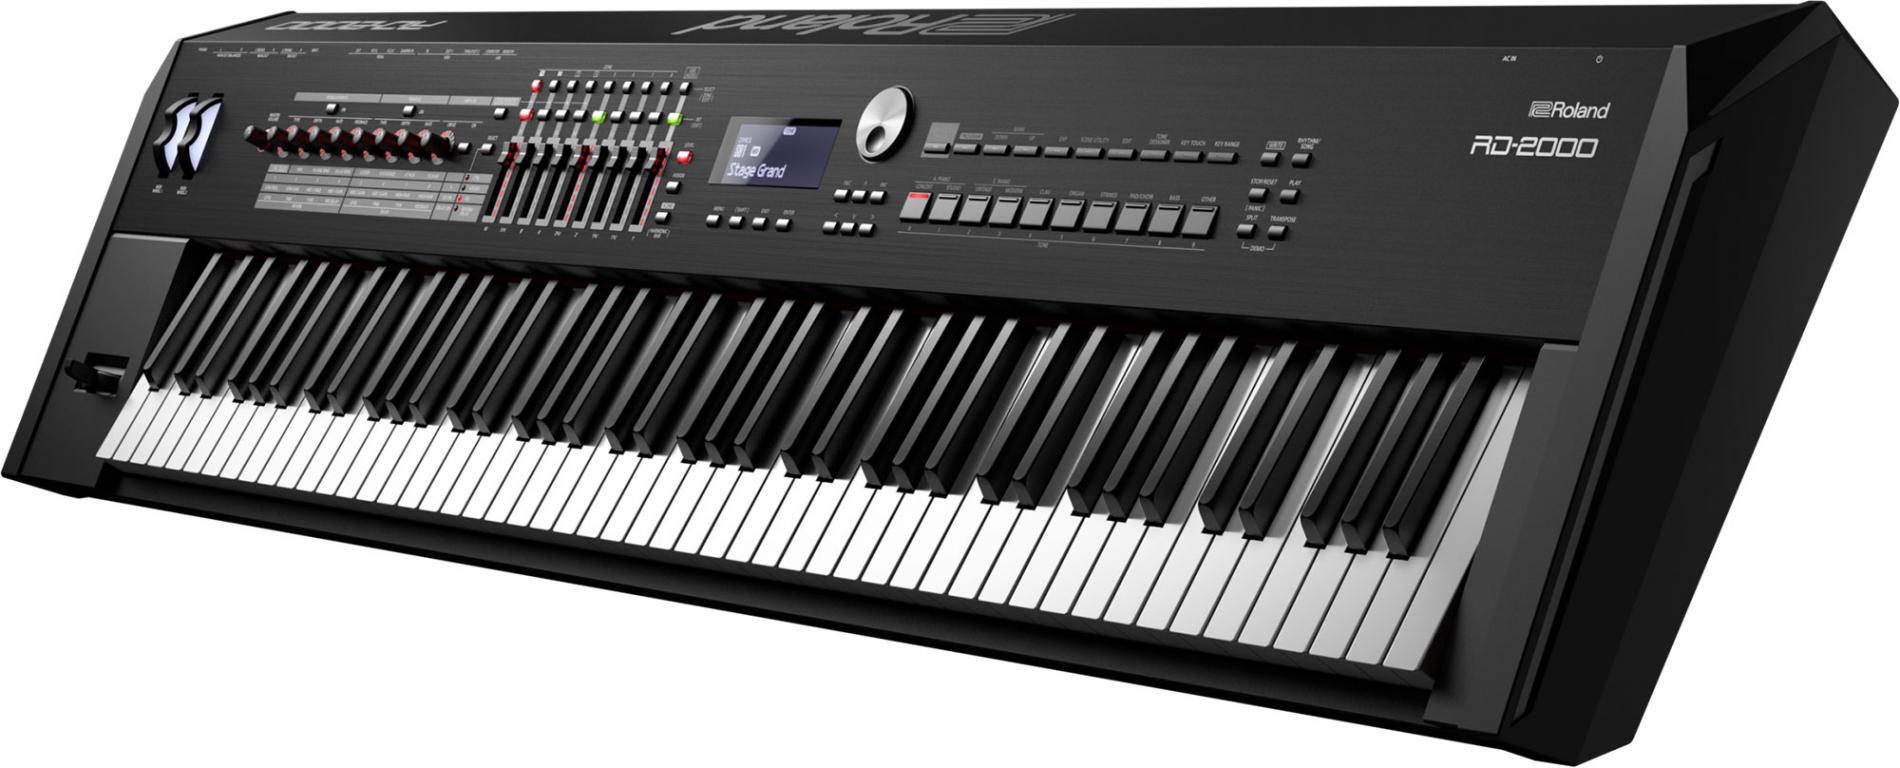 RD-2000 Stage-Piano